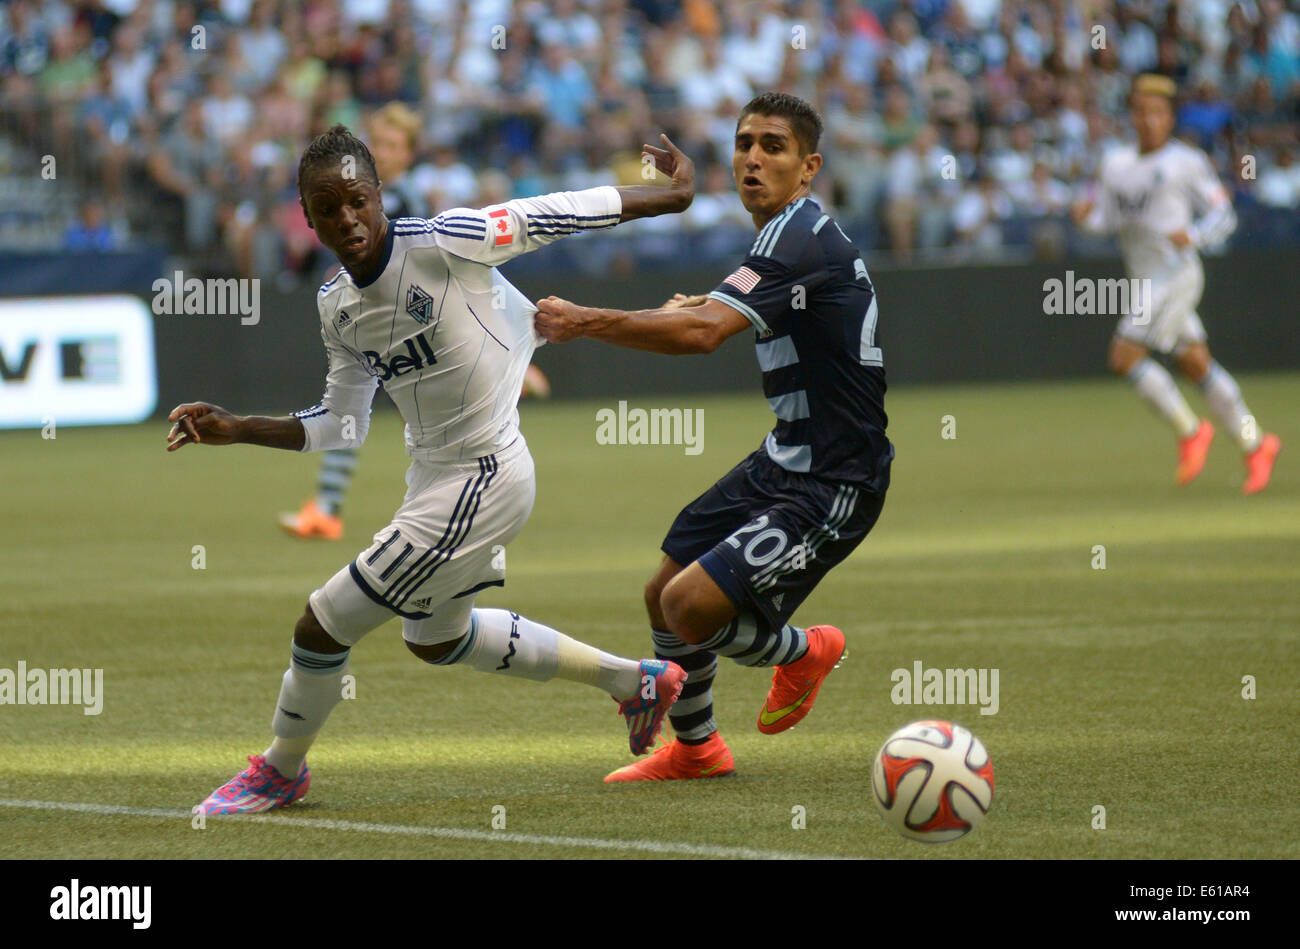 Vancouver, Canada. 10th Aug, 2014. Sporting Kansas City's Jorge Claros (R) vies with Vancouver Whitecaps' Darren Mattocks during their MLS soccer game at BC Place in Vancouver, Canada, on Aug. 10, 2014. Vancouver Whitecaps defeated Sporting KC by 2-0. © Sergei Bachlakov/Xinhua/Alamy Live News Stock Photo